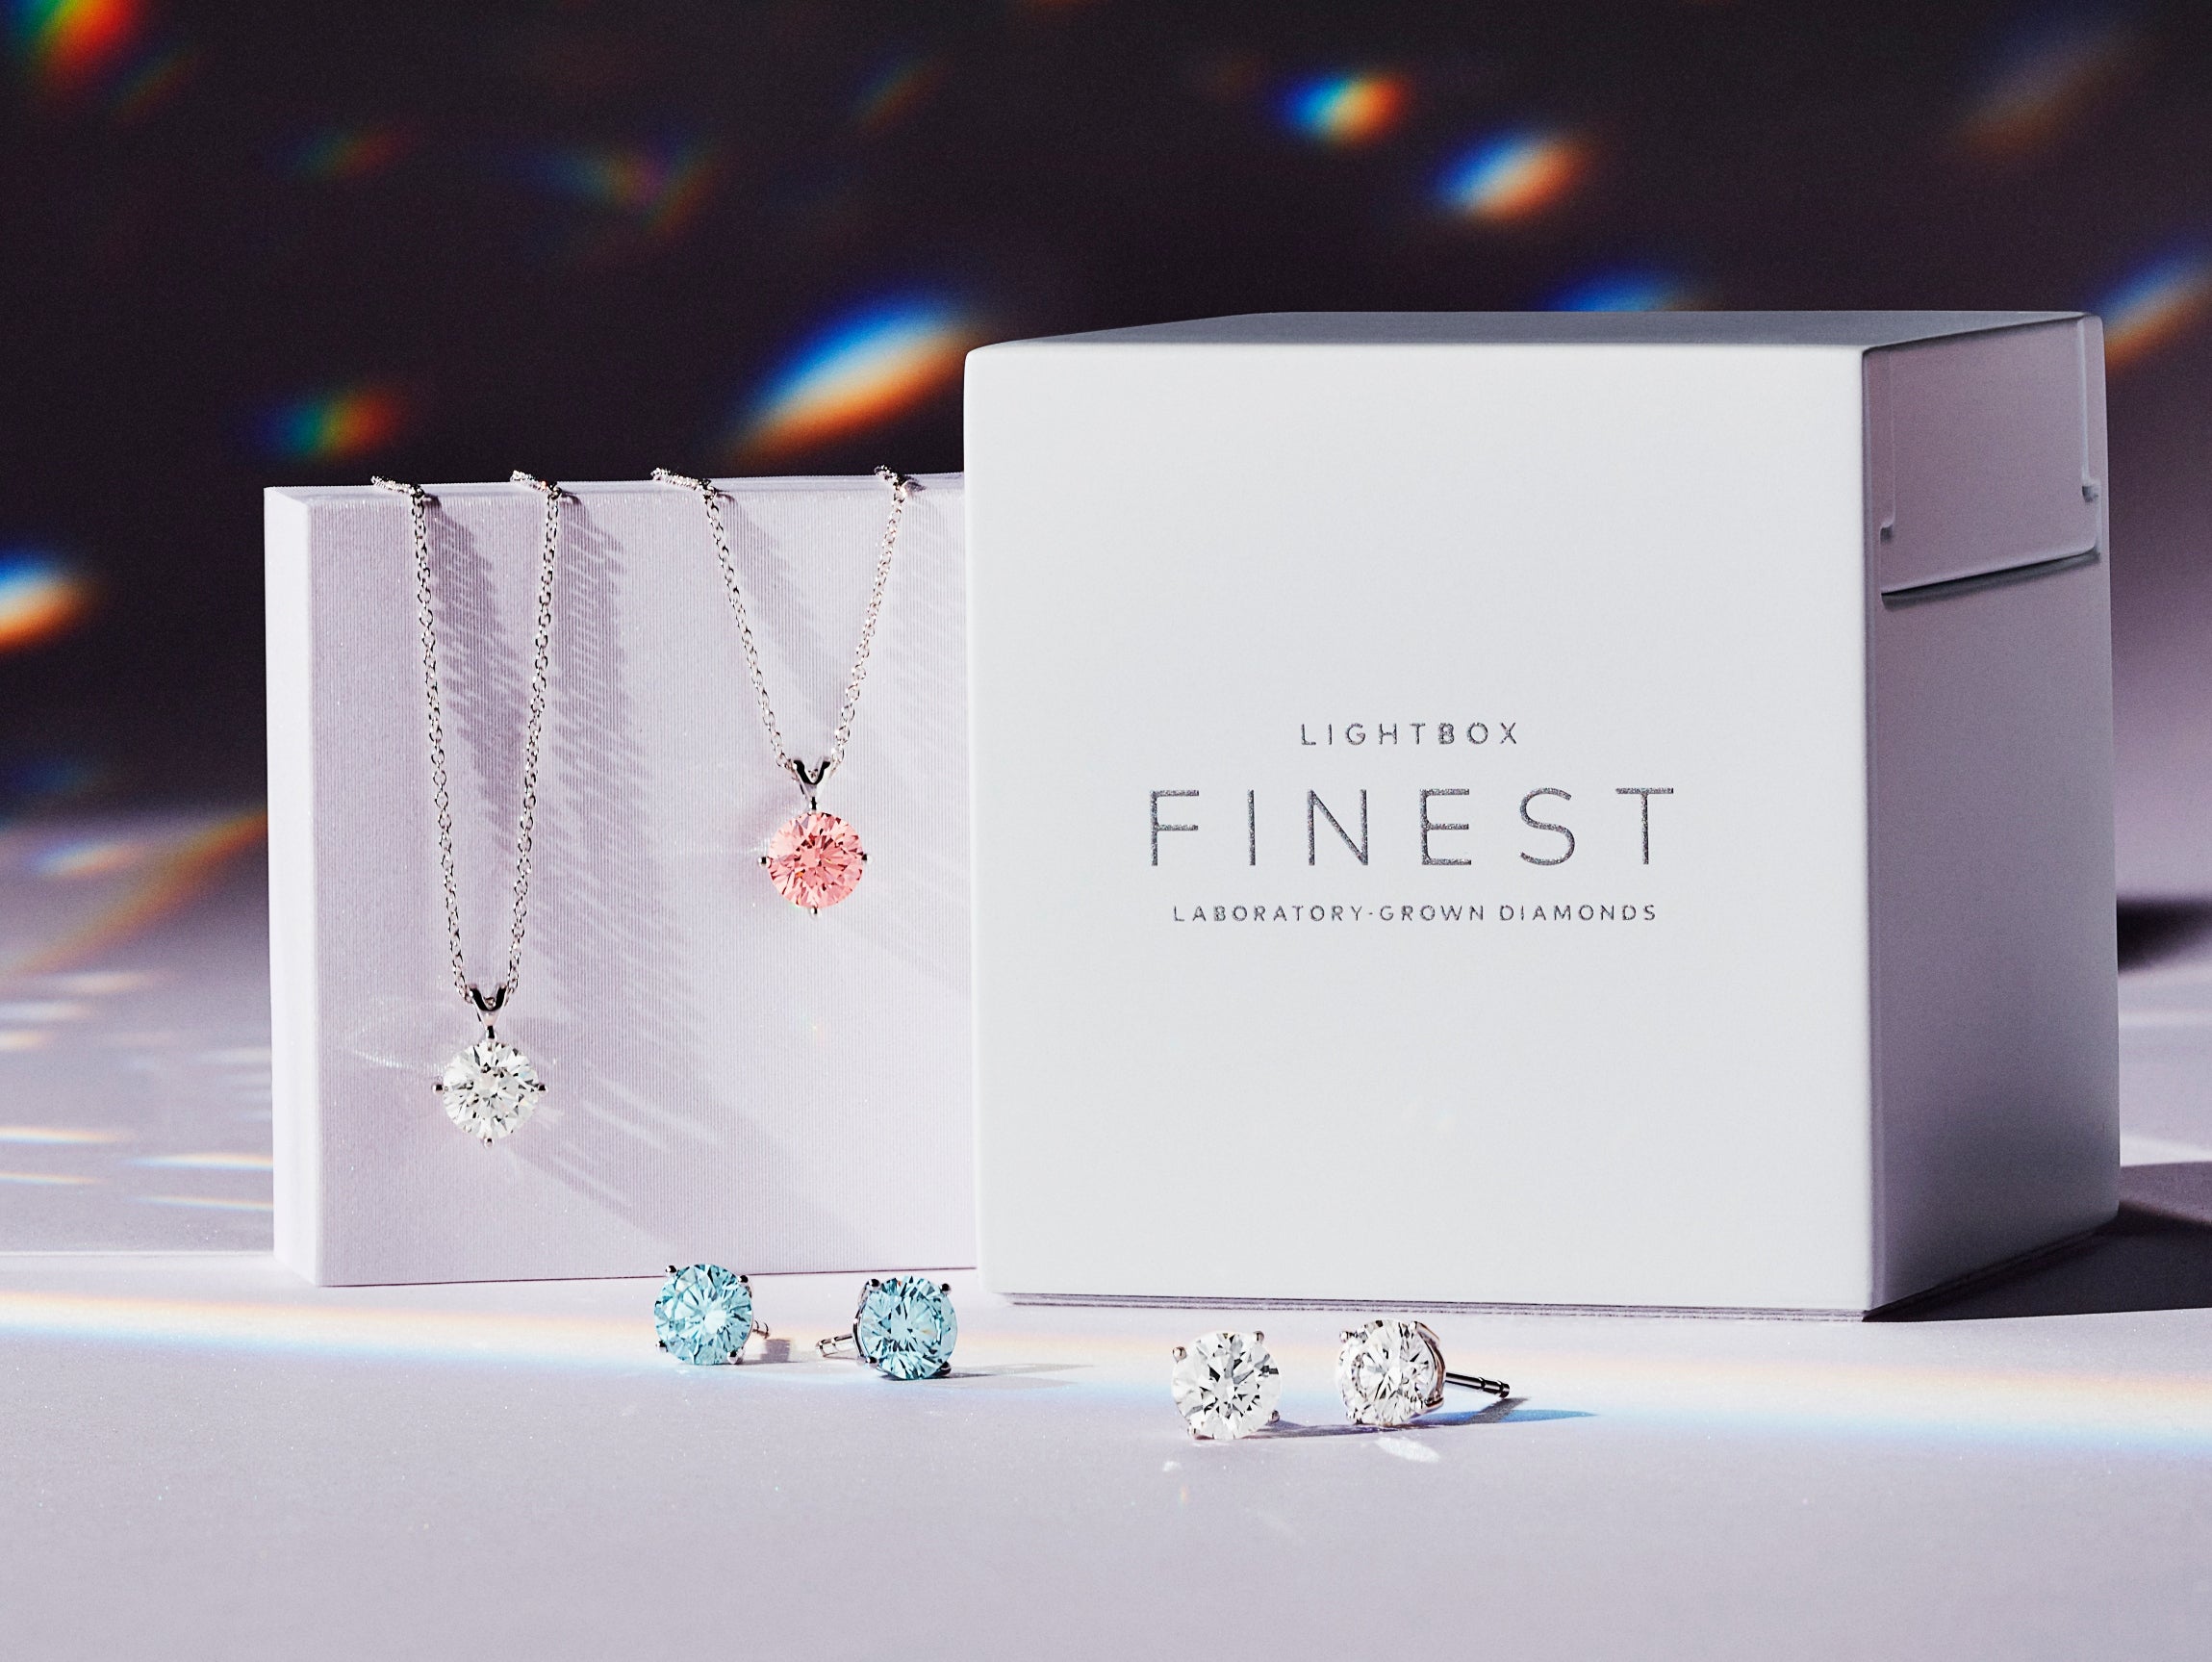 Lightbox Finest jewelry collection and Finest packaging box